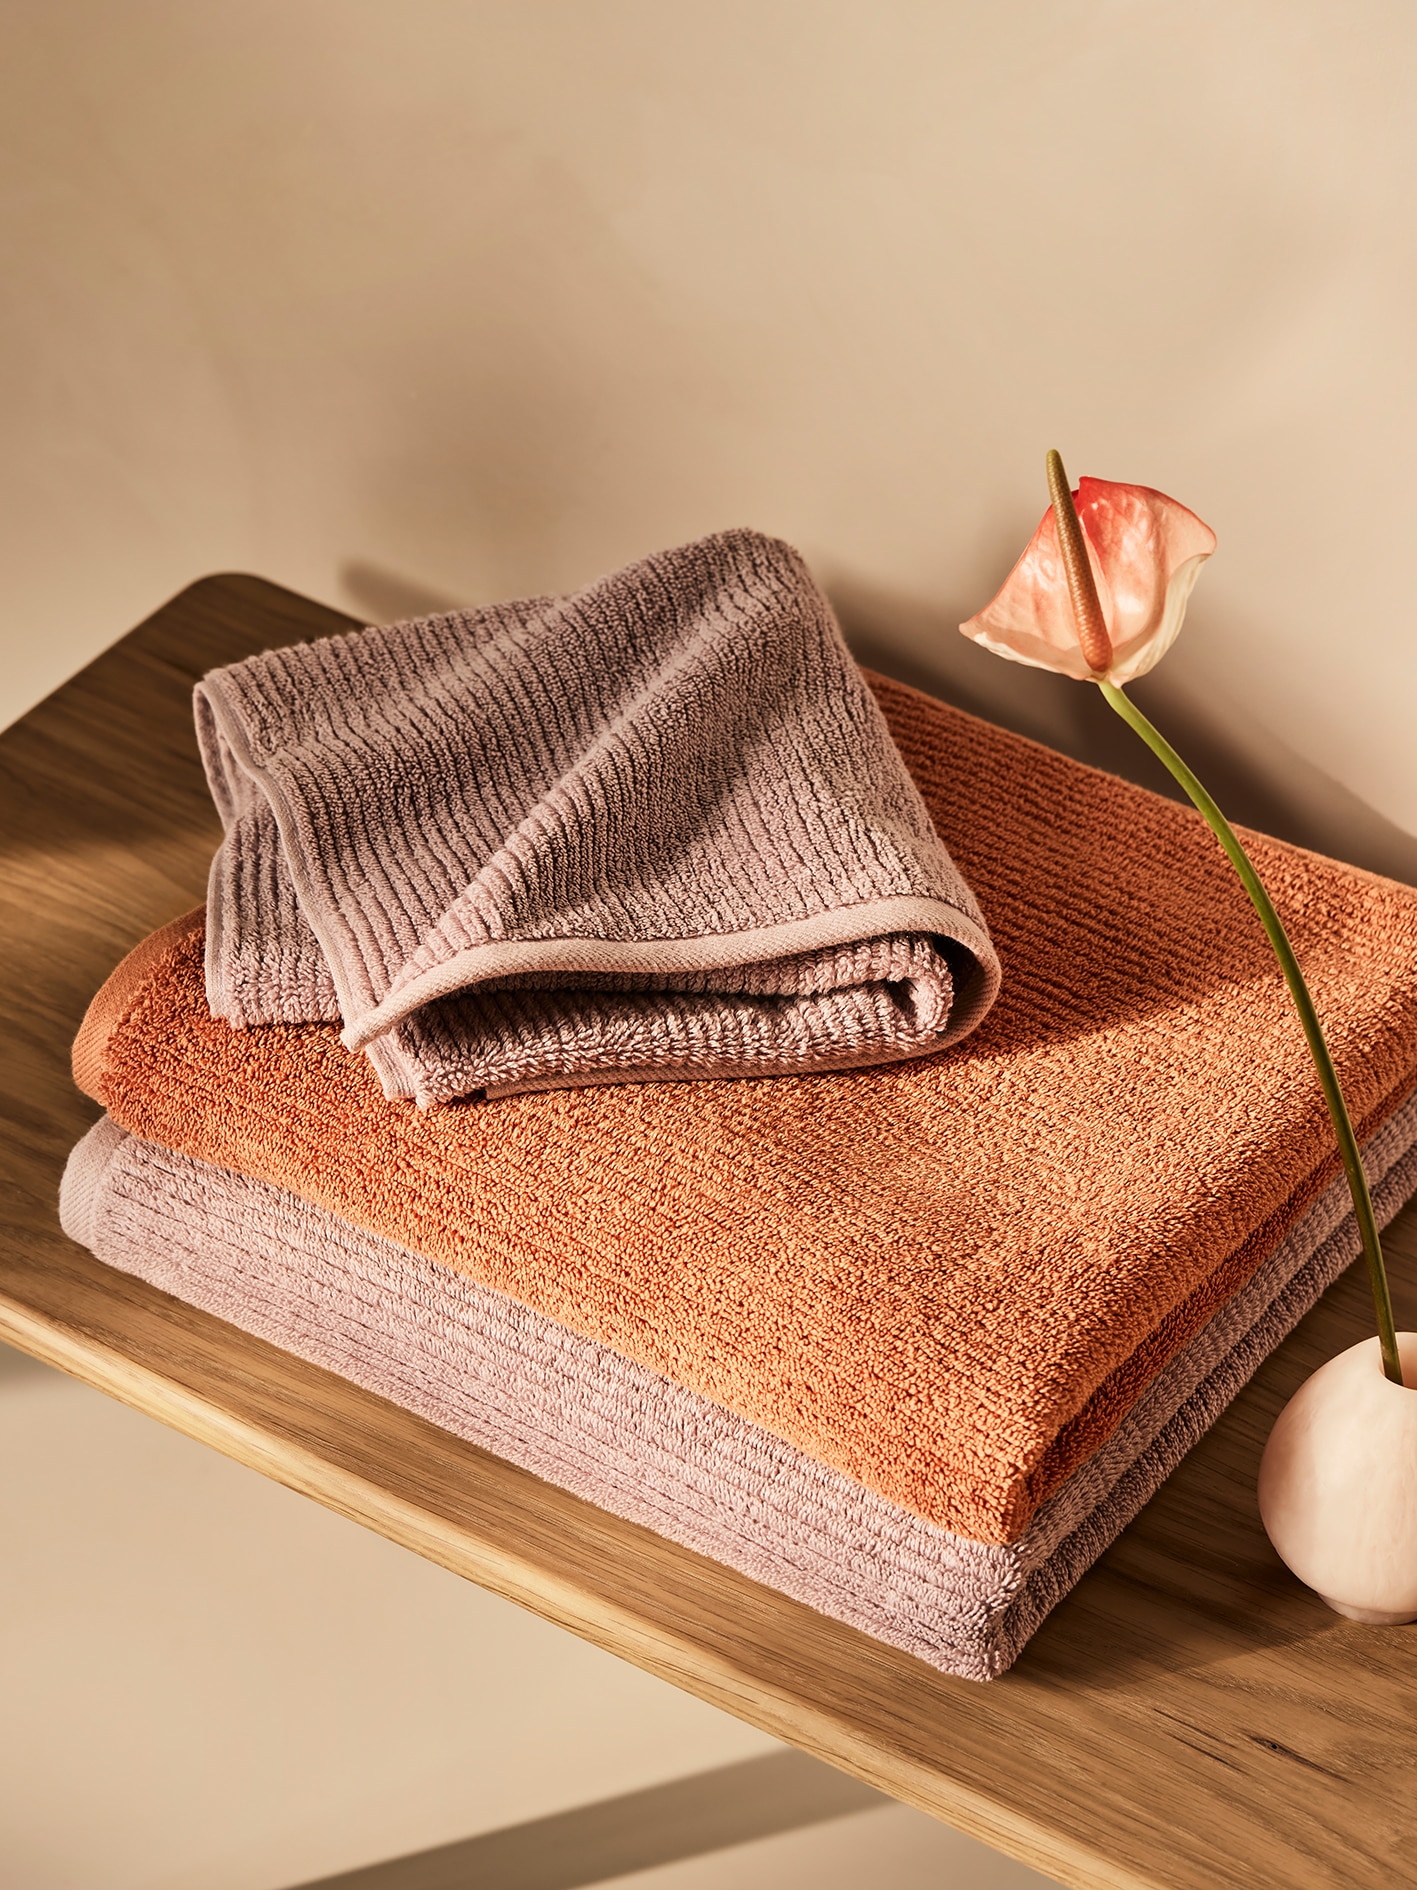 Brown and orange stacked cotton bath towels on wooden beach, with single flower in vase sitting next to it.